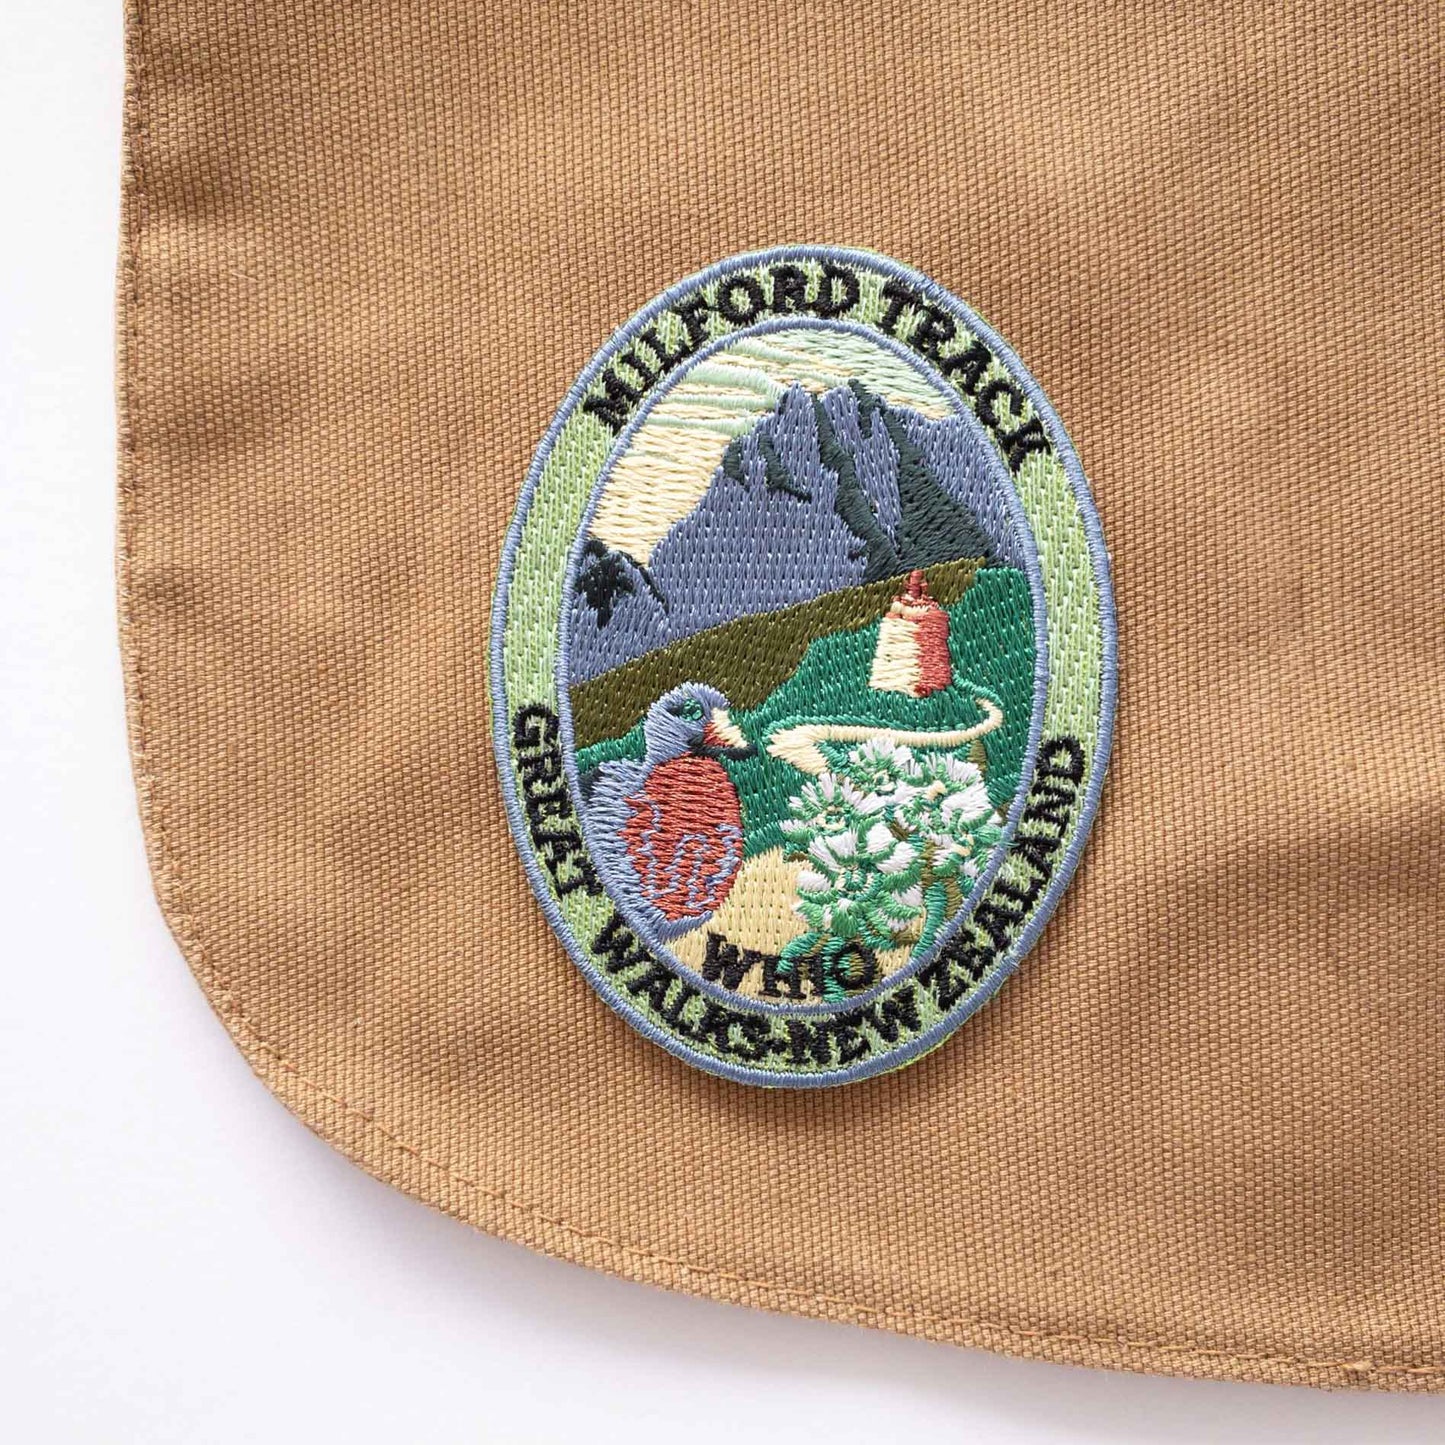 Oval, embroidered Milford Track patch, with a whio/blue duck, blue peak and mountain buttercup, on a brown canvas bag..